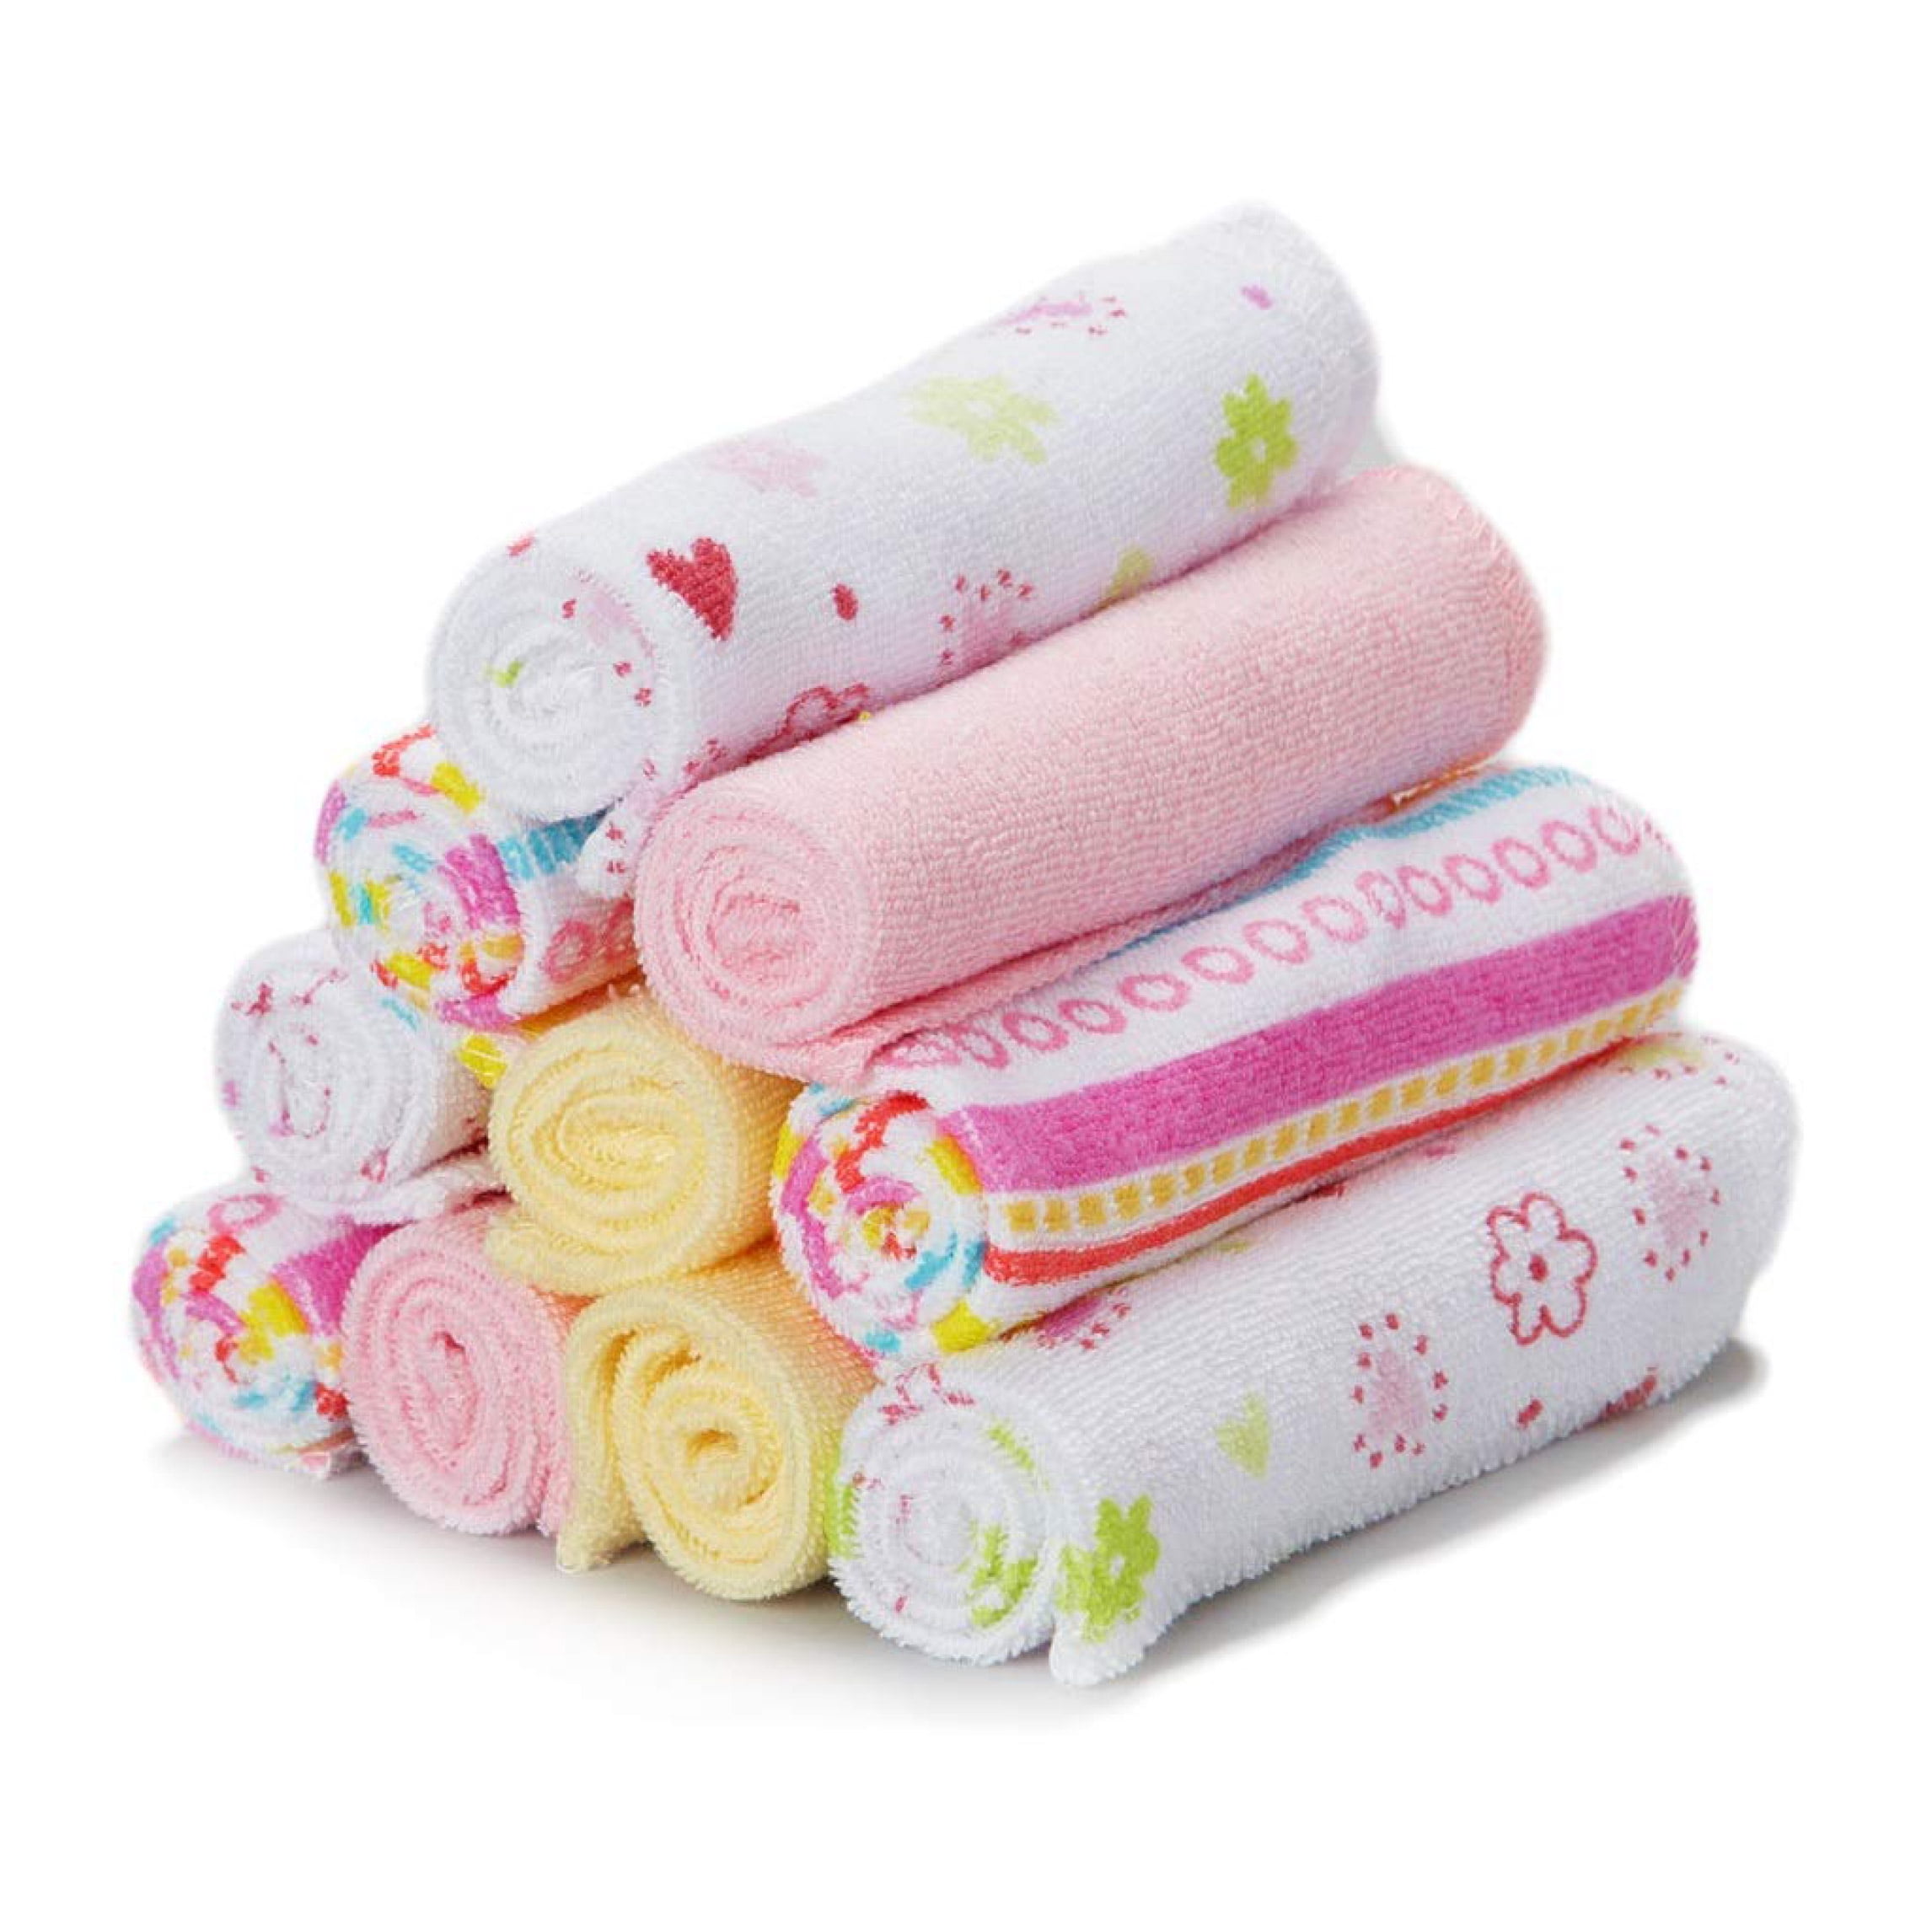 Spasilk Washcloth Wipes Set for Newborns and Infants, Terry Bathtime Essentials, Pack of 10, Pink Stripes